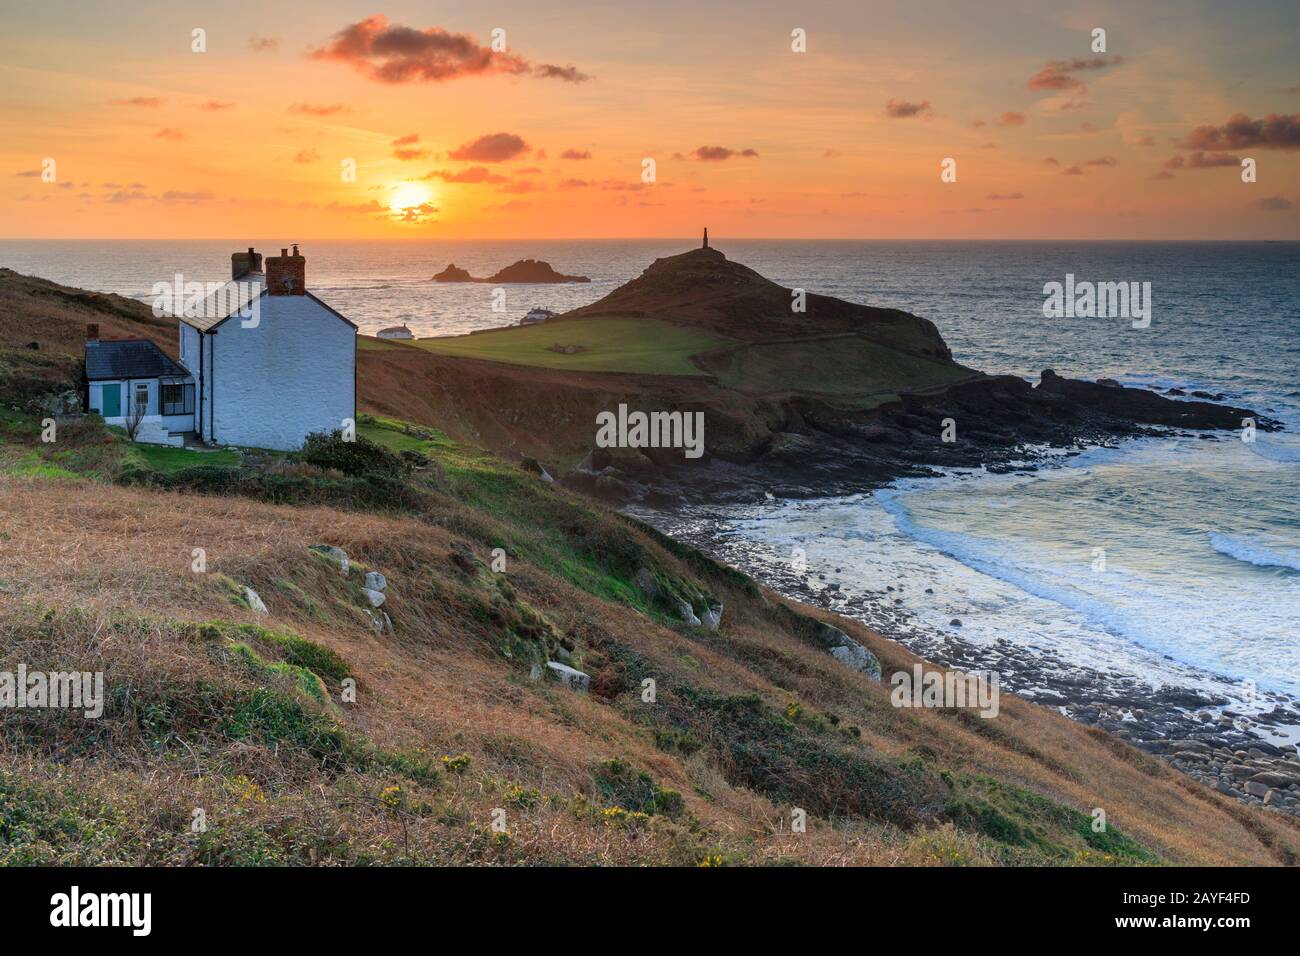 The setting sun captured form the South West Coast Path with Cape Cornwall and The Brisons in the distance. Stock Photo